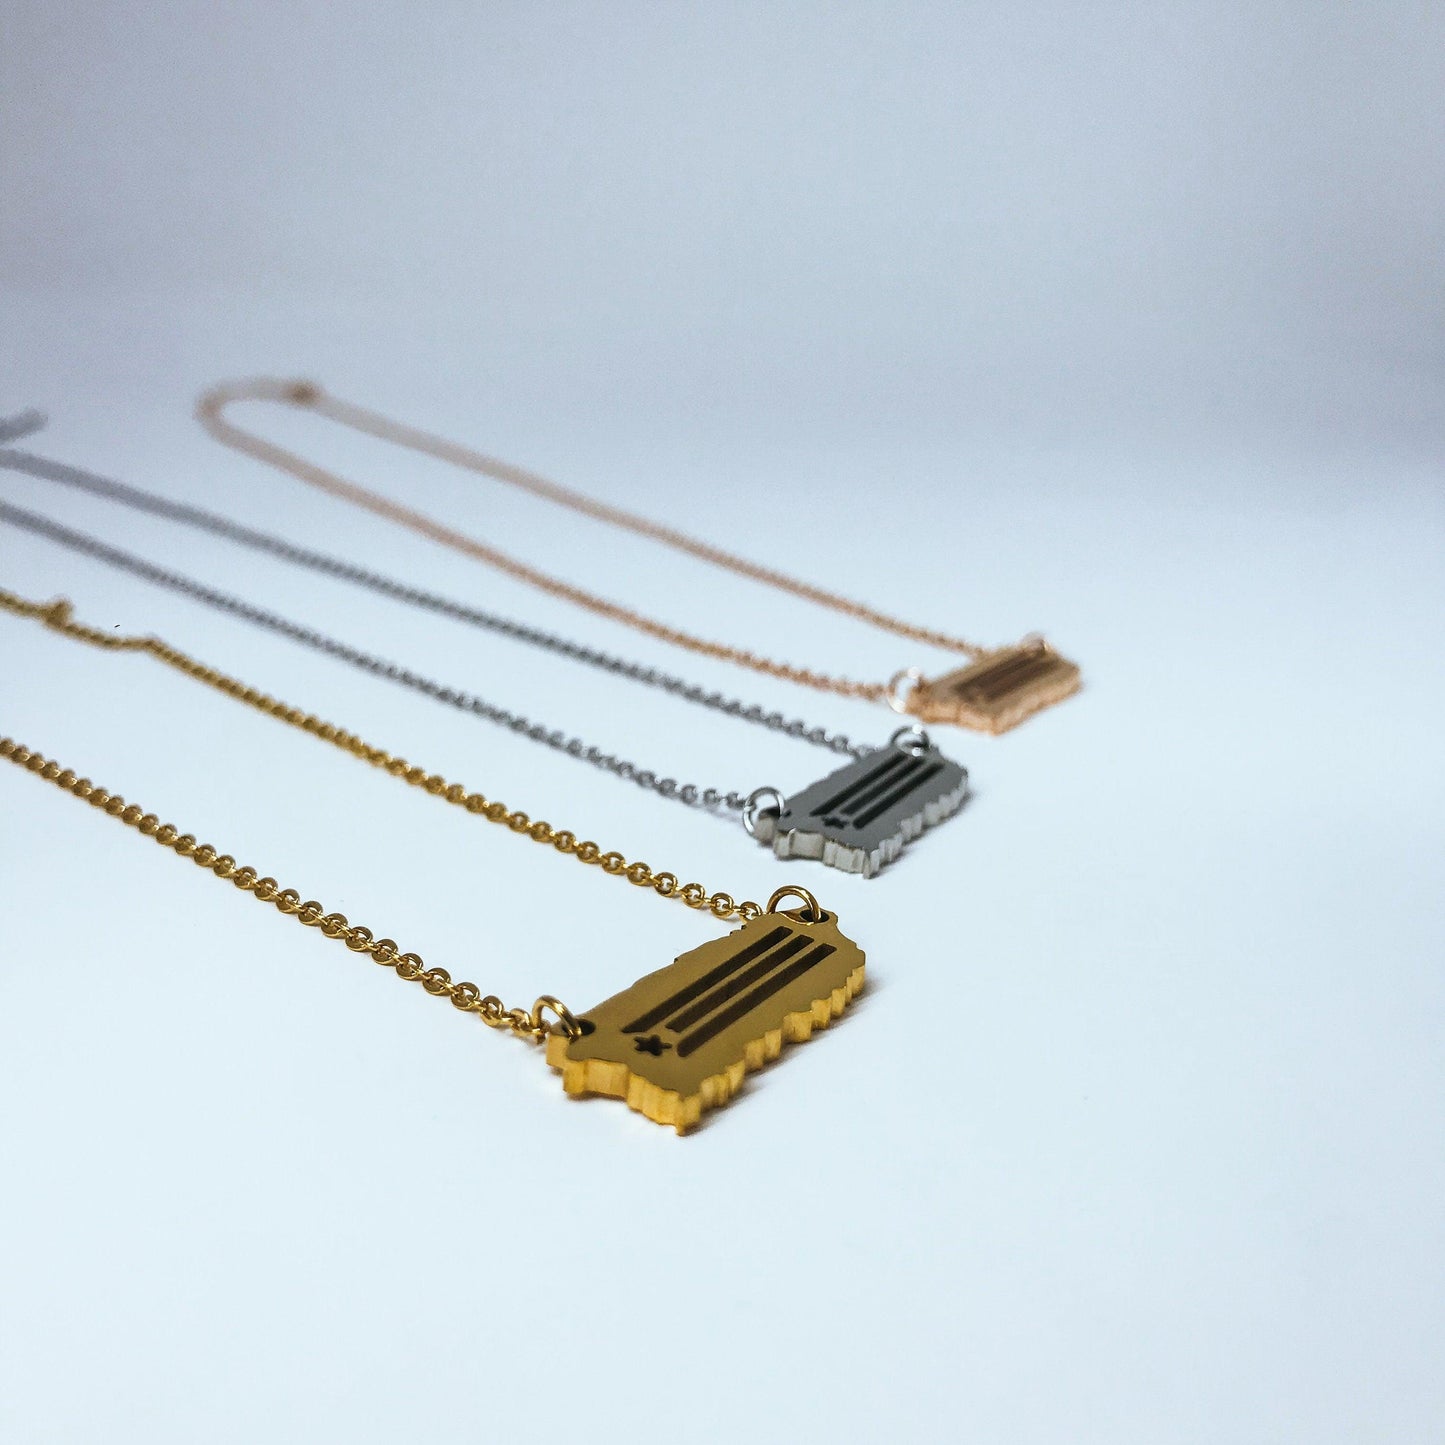 Puerto Rico Silhouette Necklaces in 3 different colors: Gold, Silver & Rose Gold